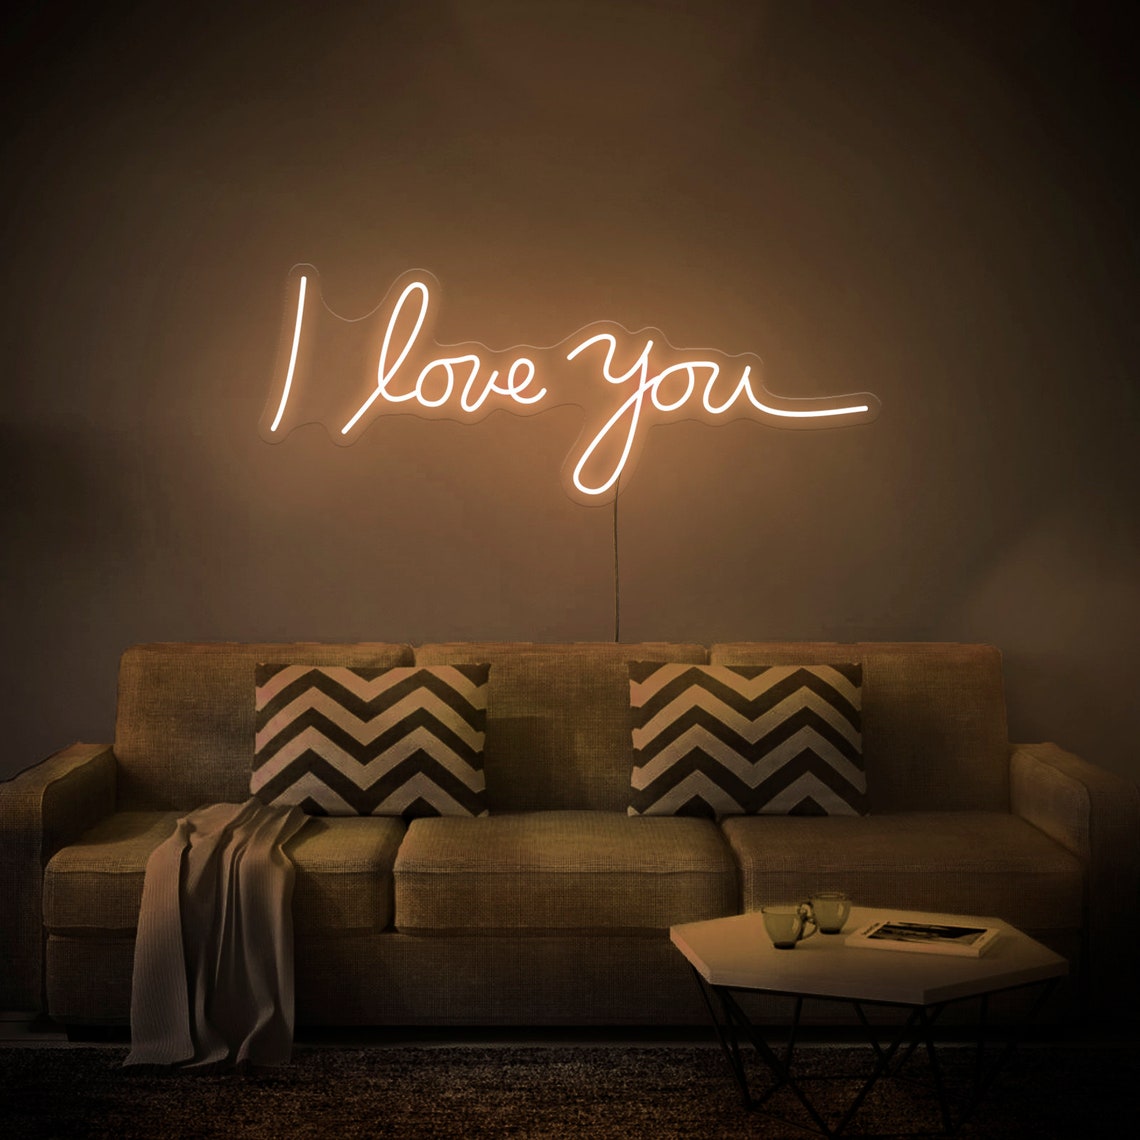 I Love You Neon Sign , Neon Sign Home Decor , Home Wall Decor , Propose Lights Neon , Proposal Wedding Engagement Decor Sign